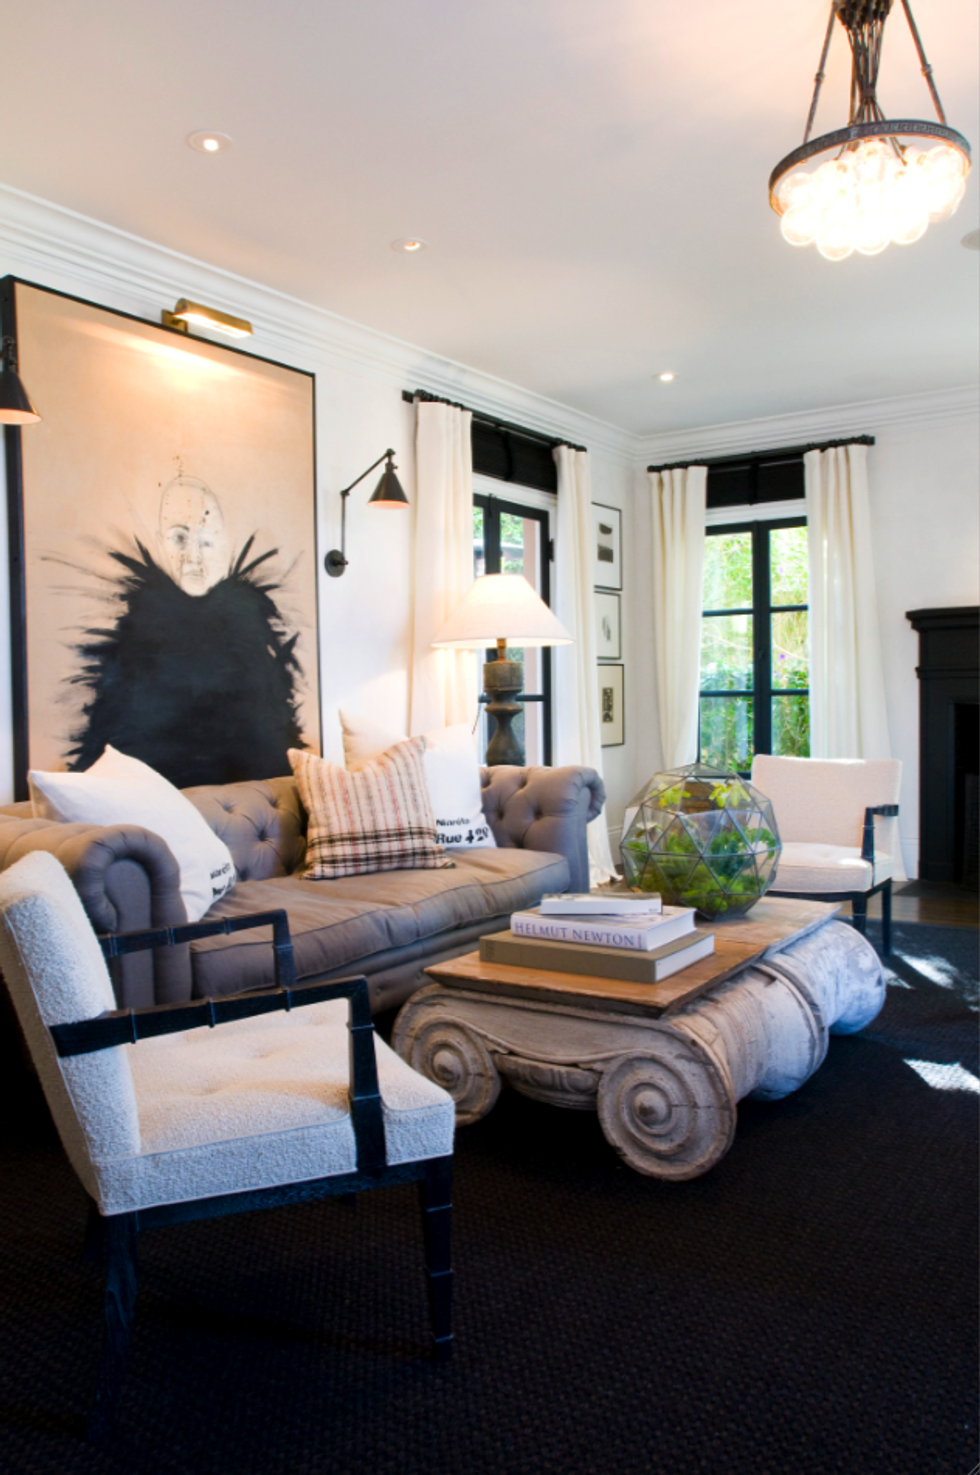 8 Reasons to See the Elle Decor Showhouse in Saint Francis Wood